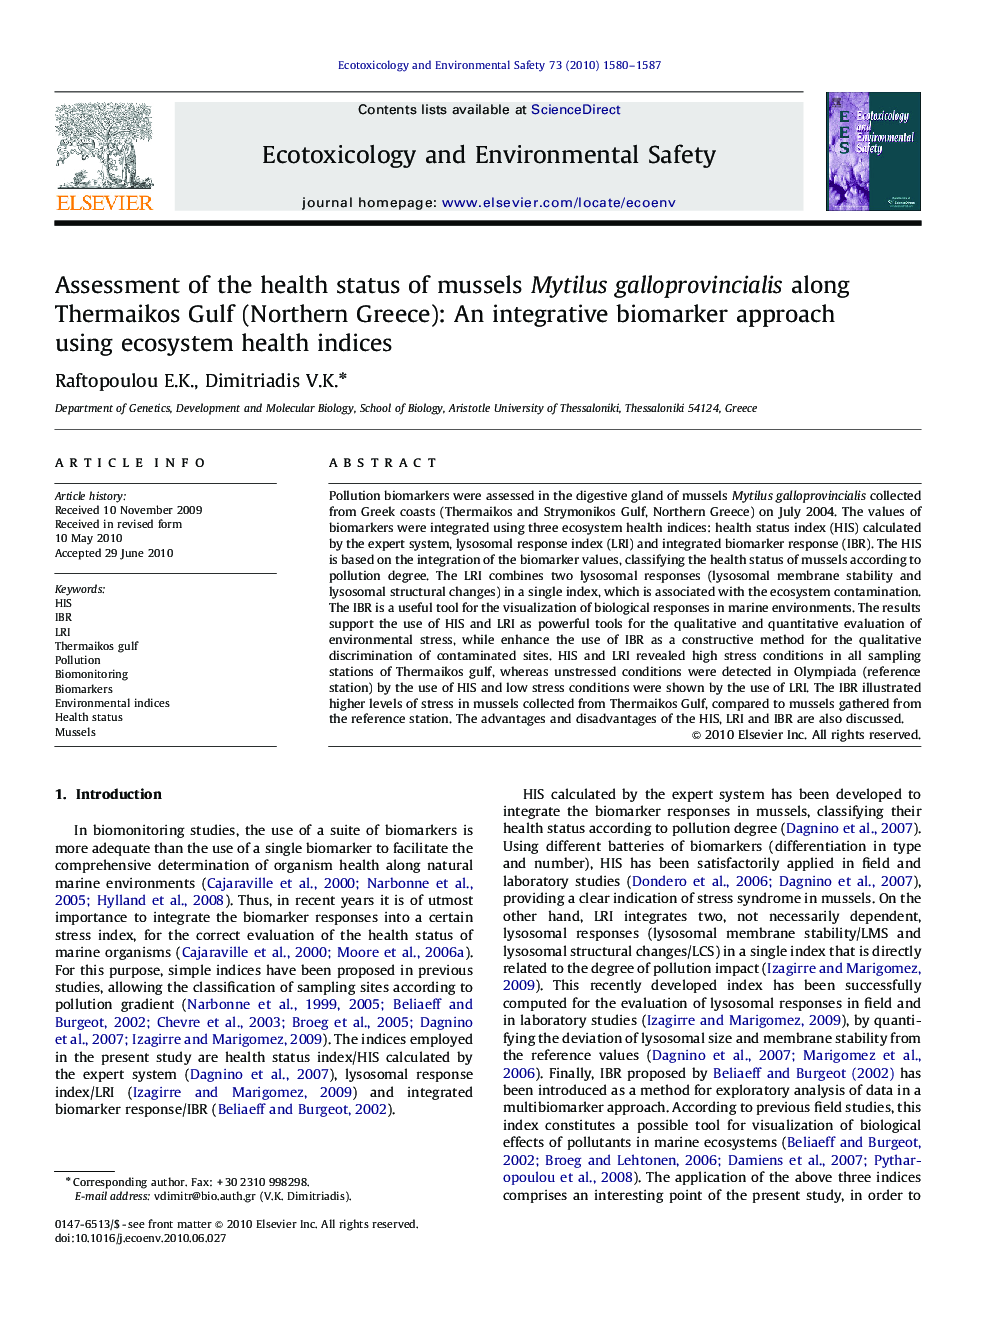 Assessment of the health status of mussels Mytilus galloprovincialis along Thermaikos Gulf (Northern Greece): An integrative biomarker approach using ecosystem health indices